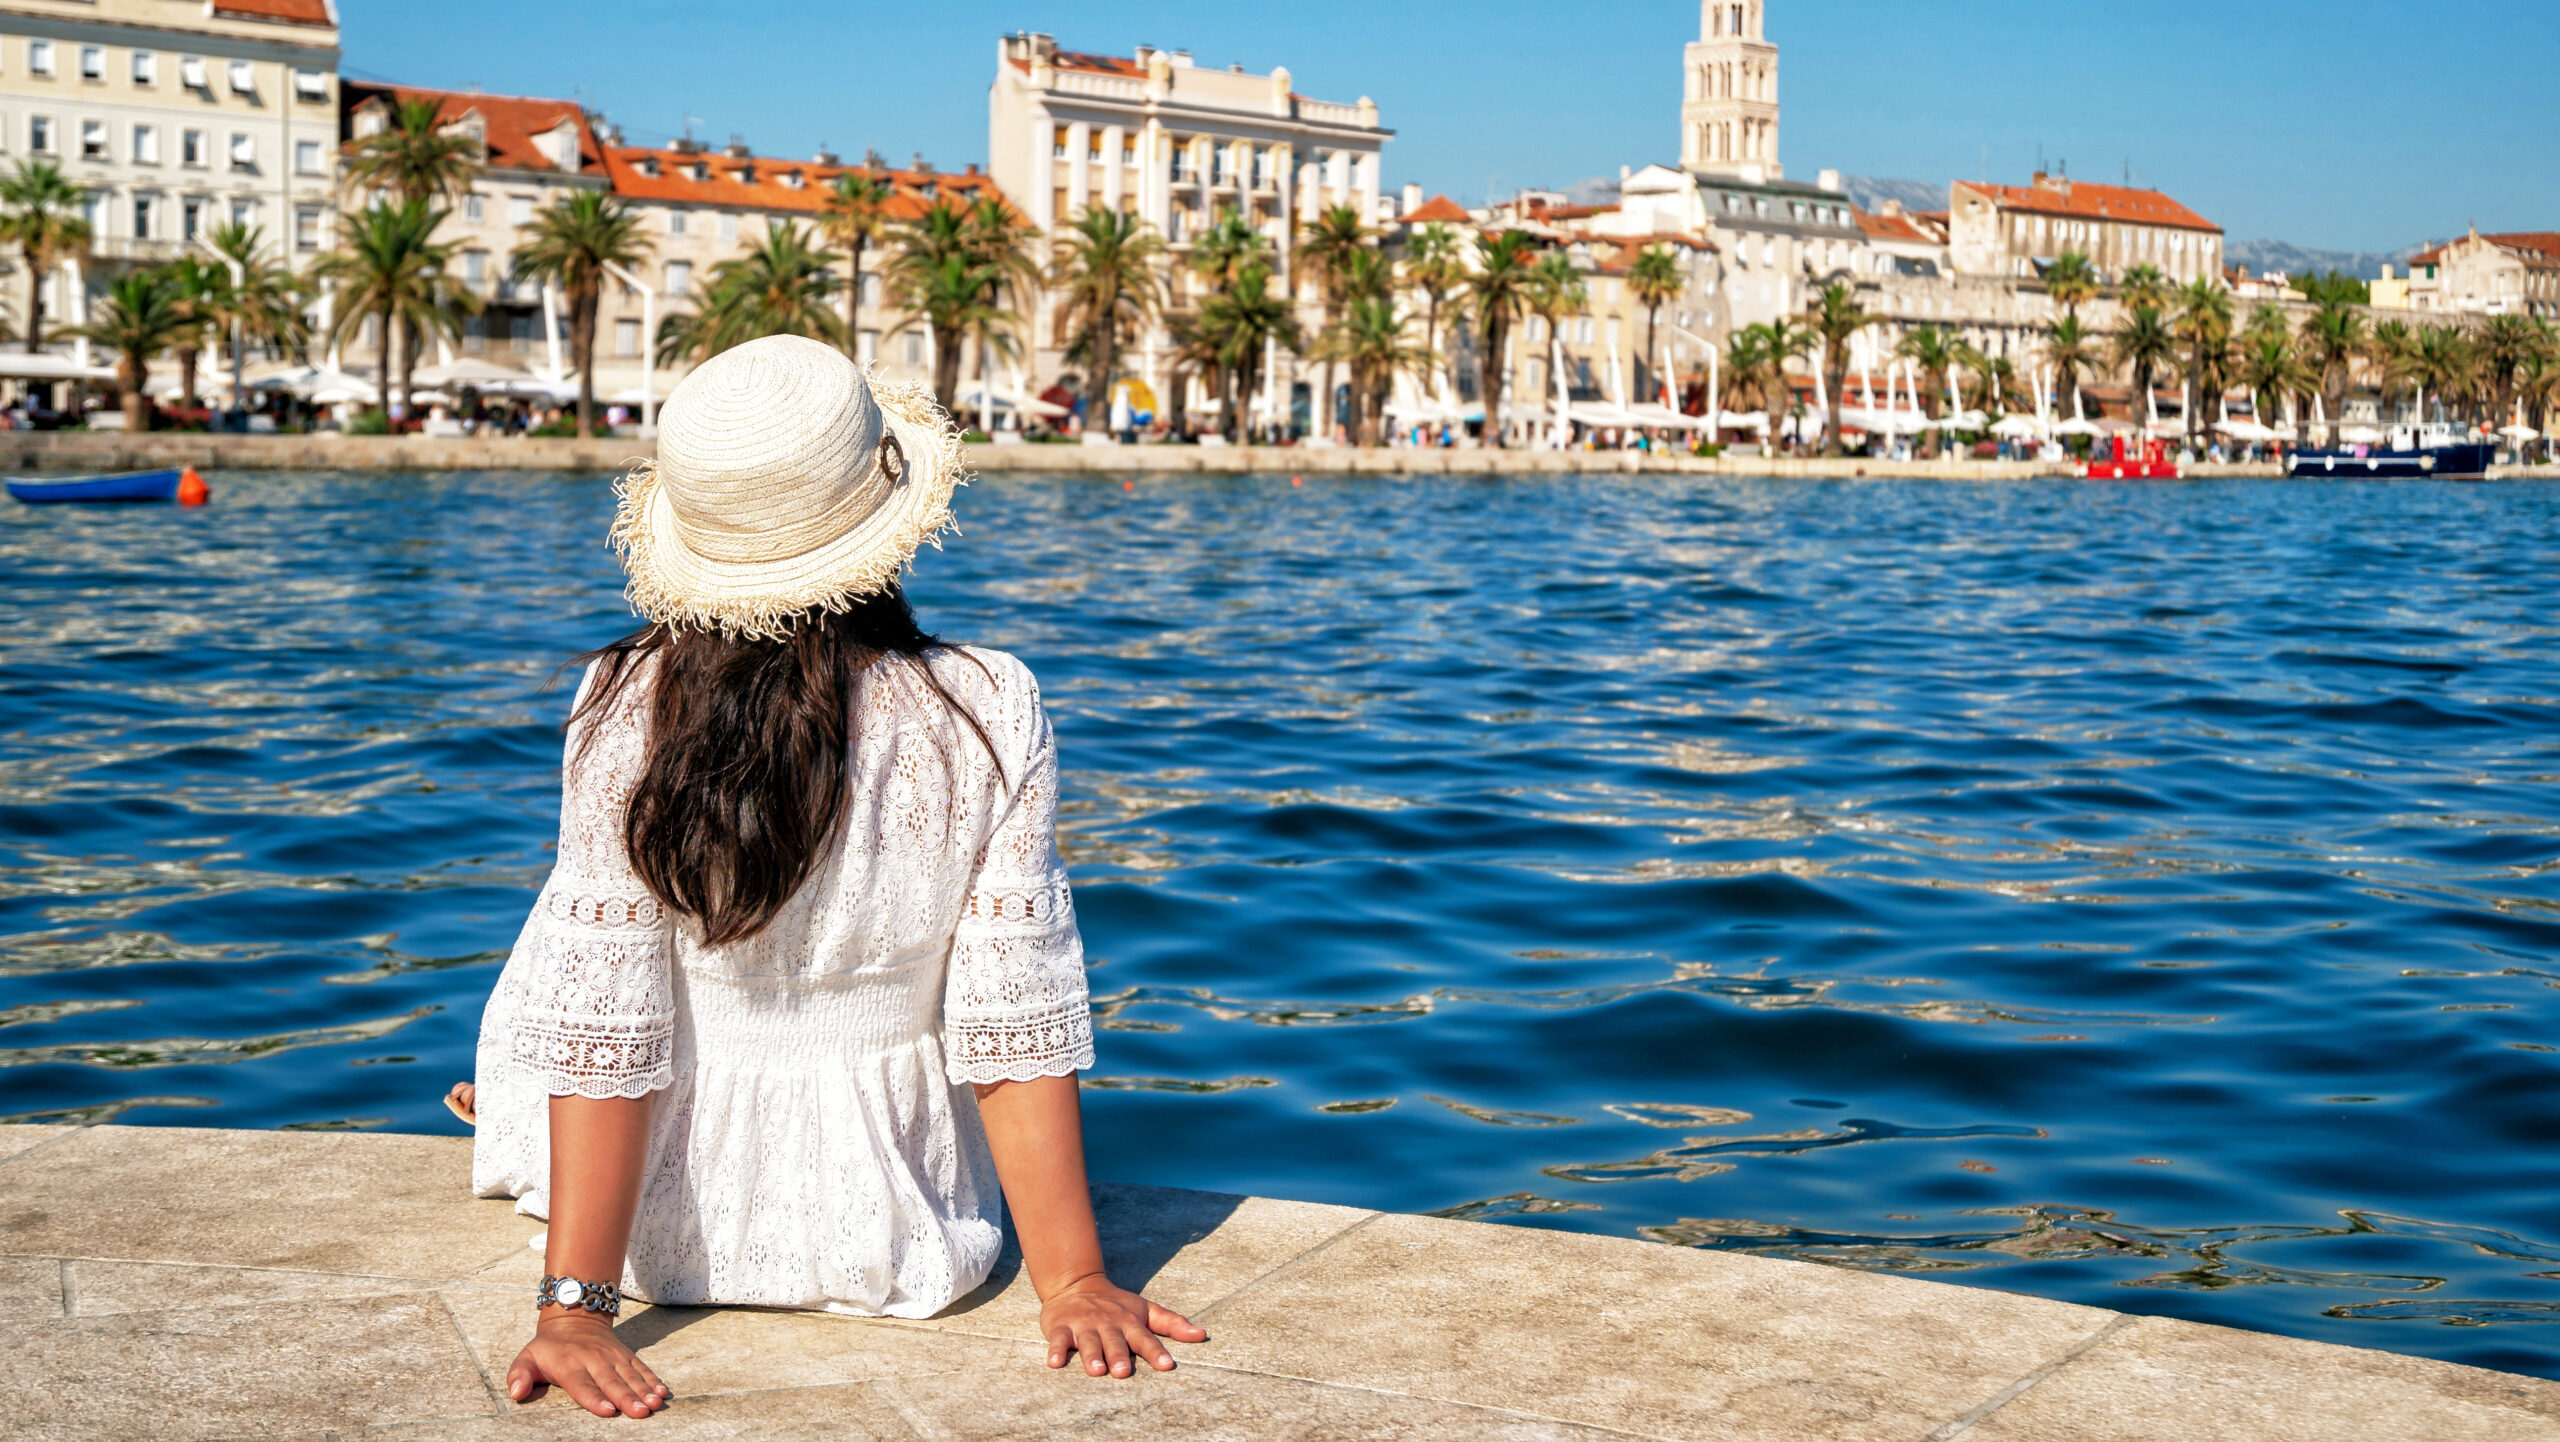 woman sitting alone looking out at the ocean with the harbor of Split, Croatia in the distance